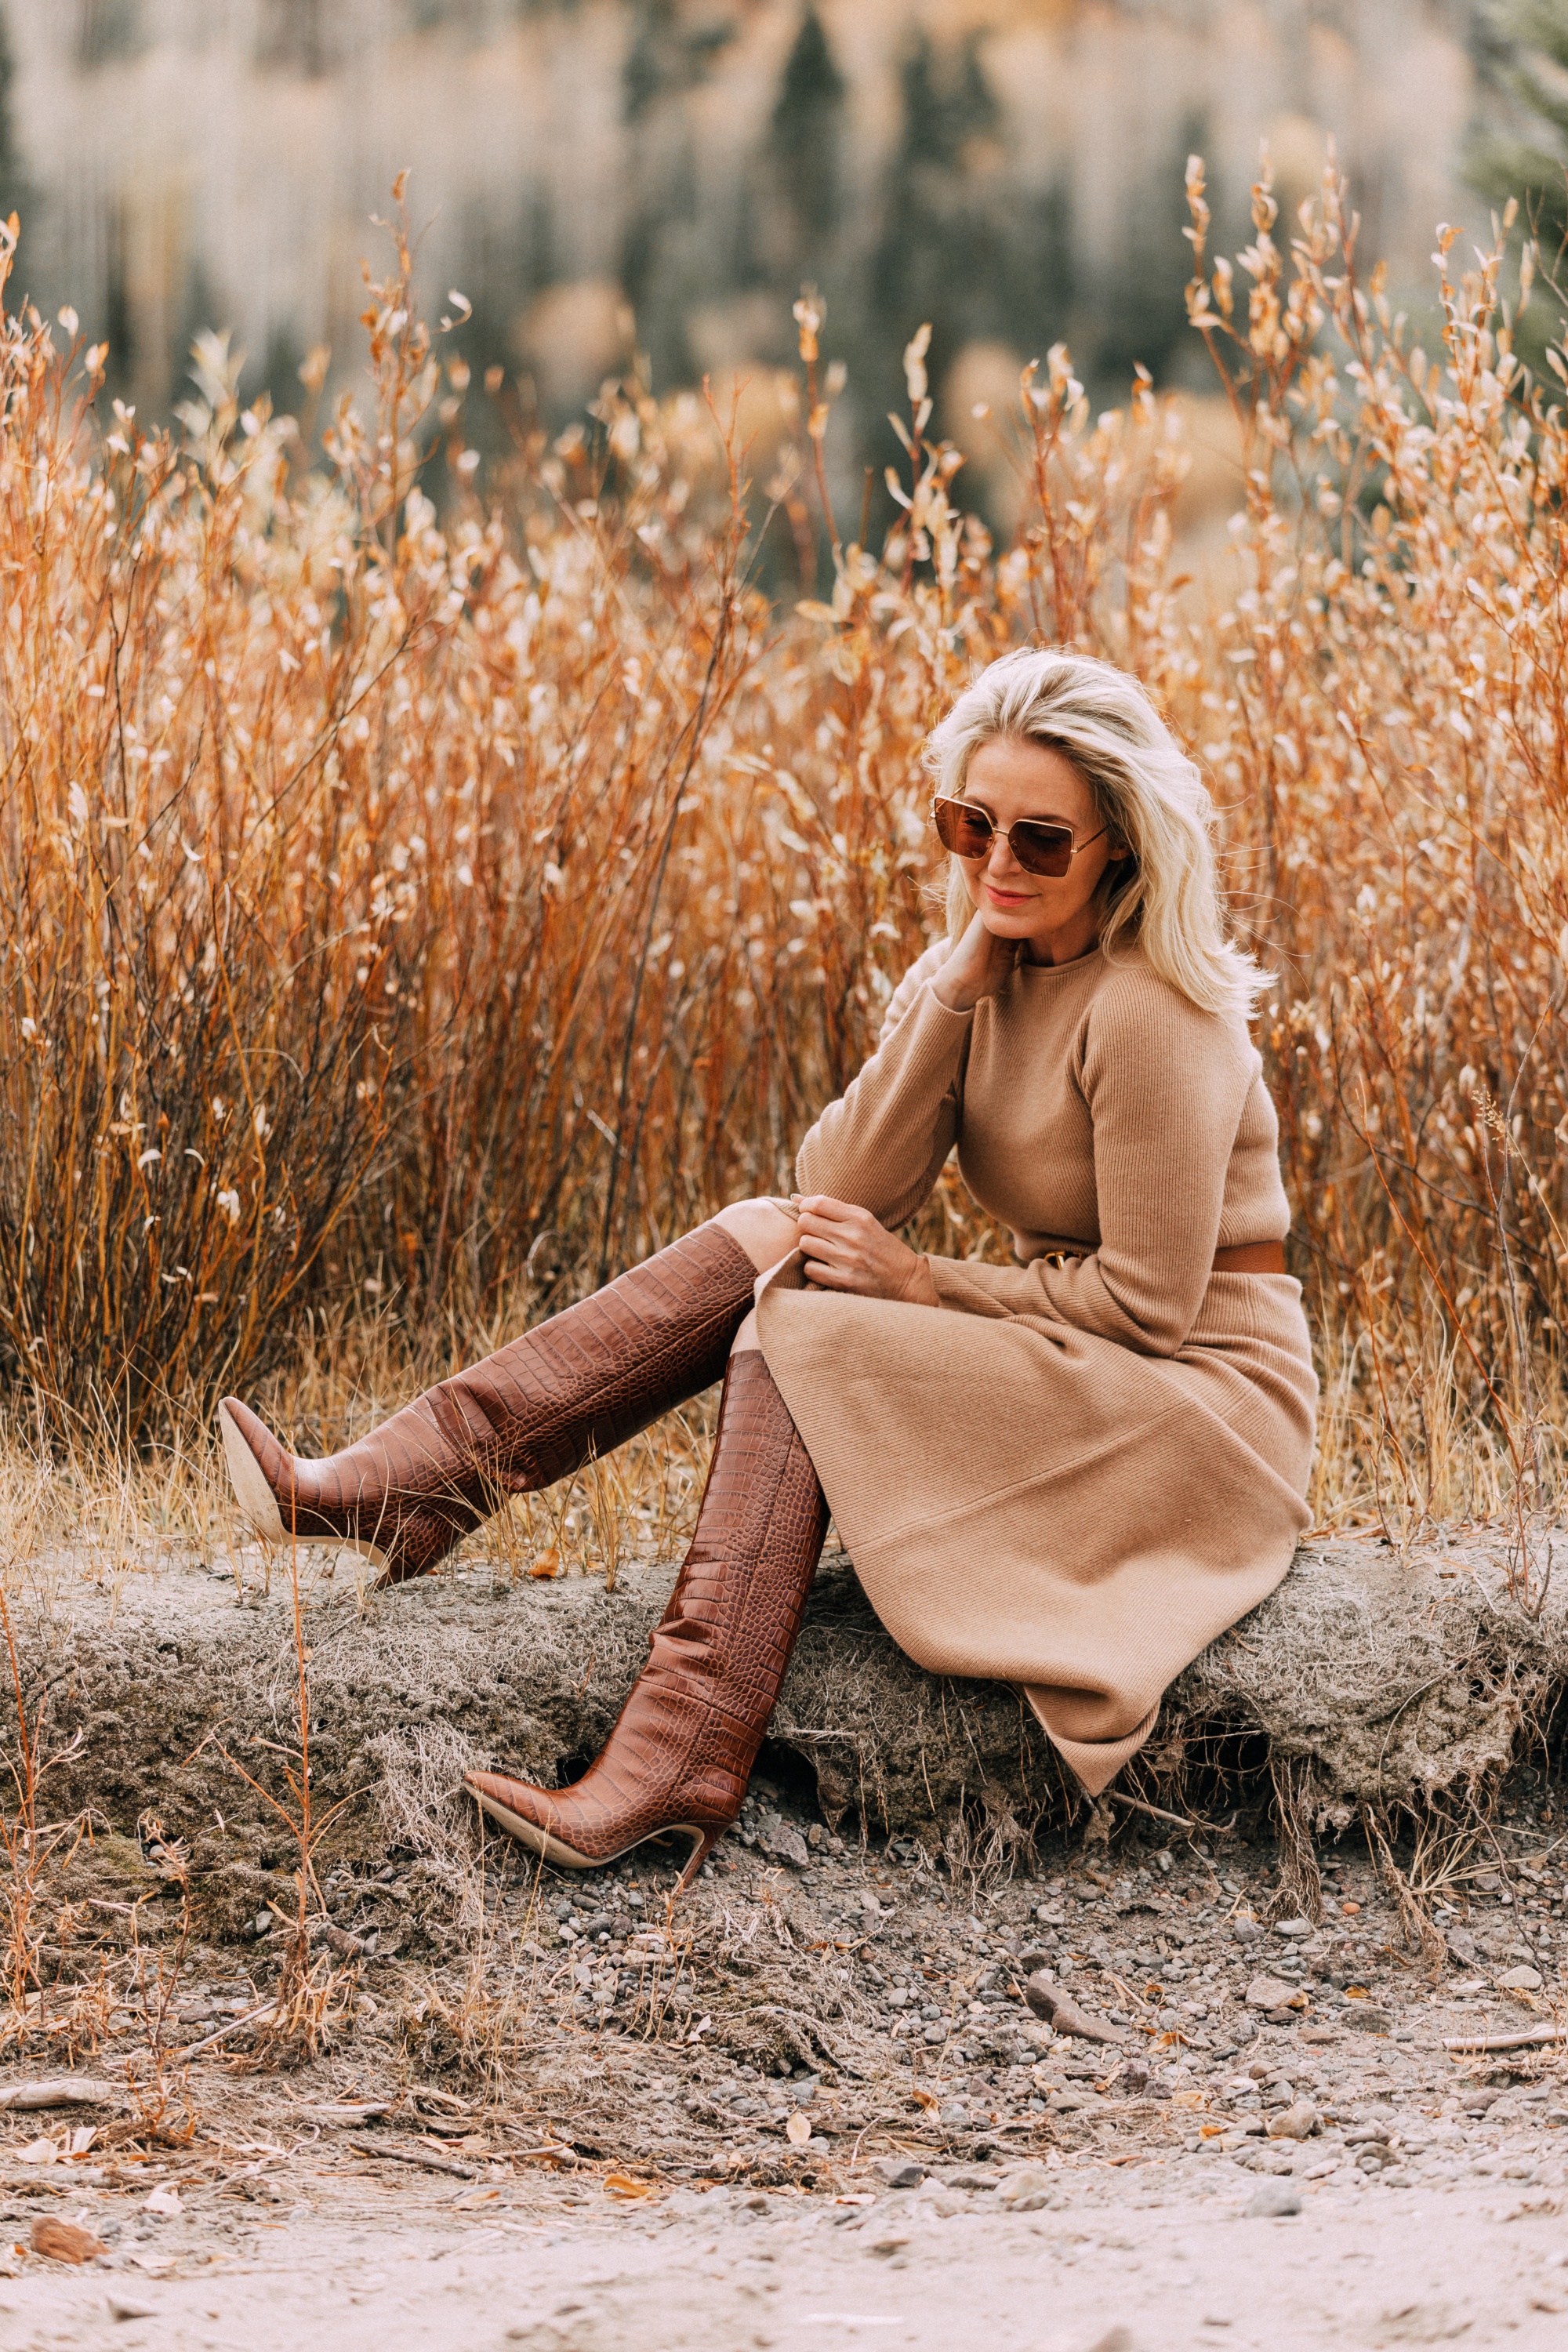 Fashion Blogger Busbee Style wearing Paris Texas crocodile embossed brown leather knee high boots Nordstrom Signature camel sweater dress Valentino waist belt